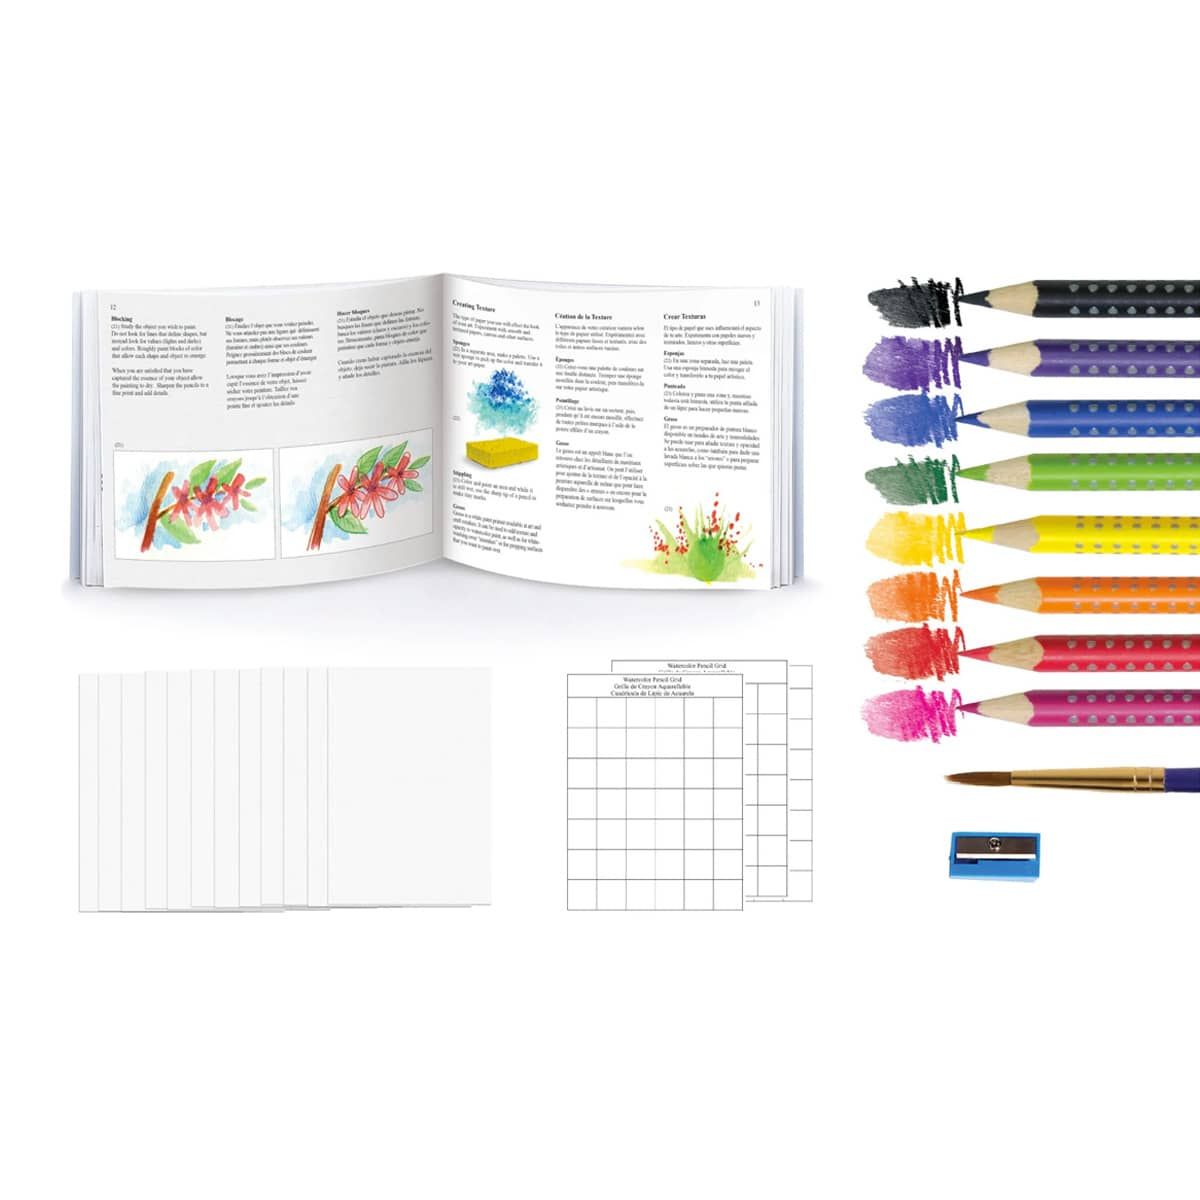 Designed for beginners and teaches the basic techniques of working with watercolor pencils!